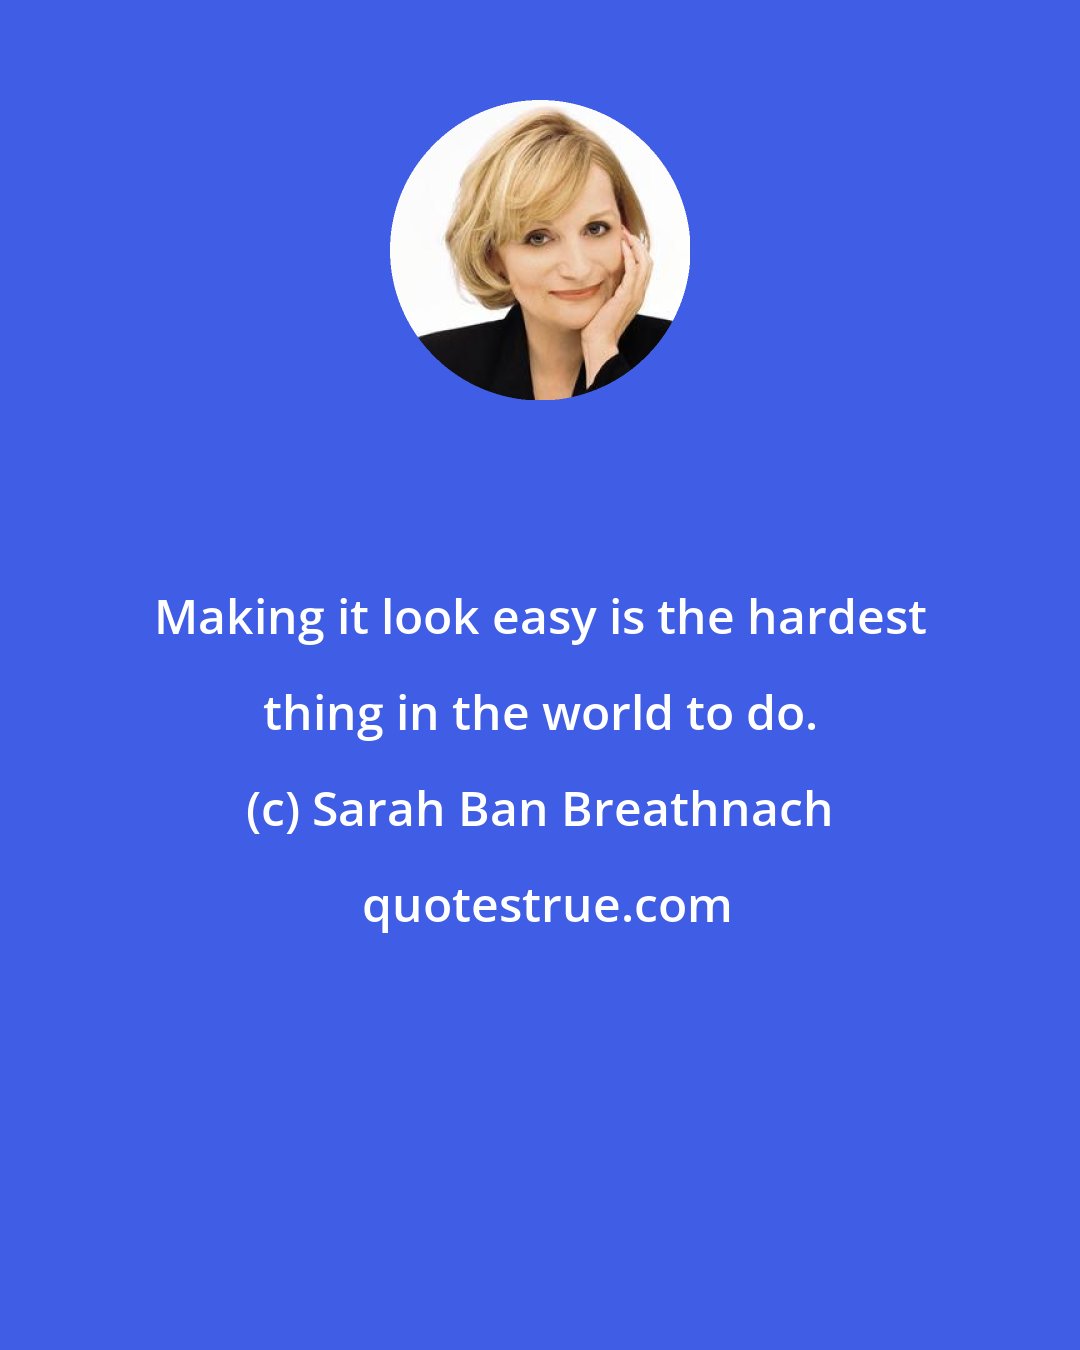 Sarah Ban Breathnach: Making it look easy is the hardest thing in the world to do.